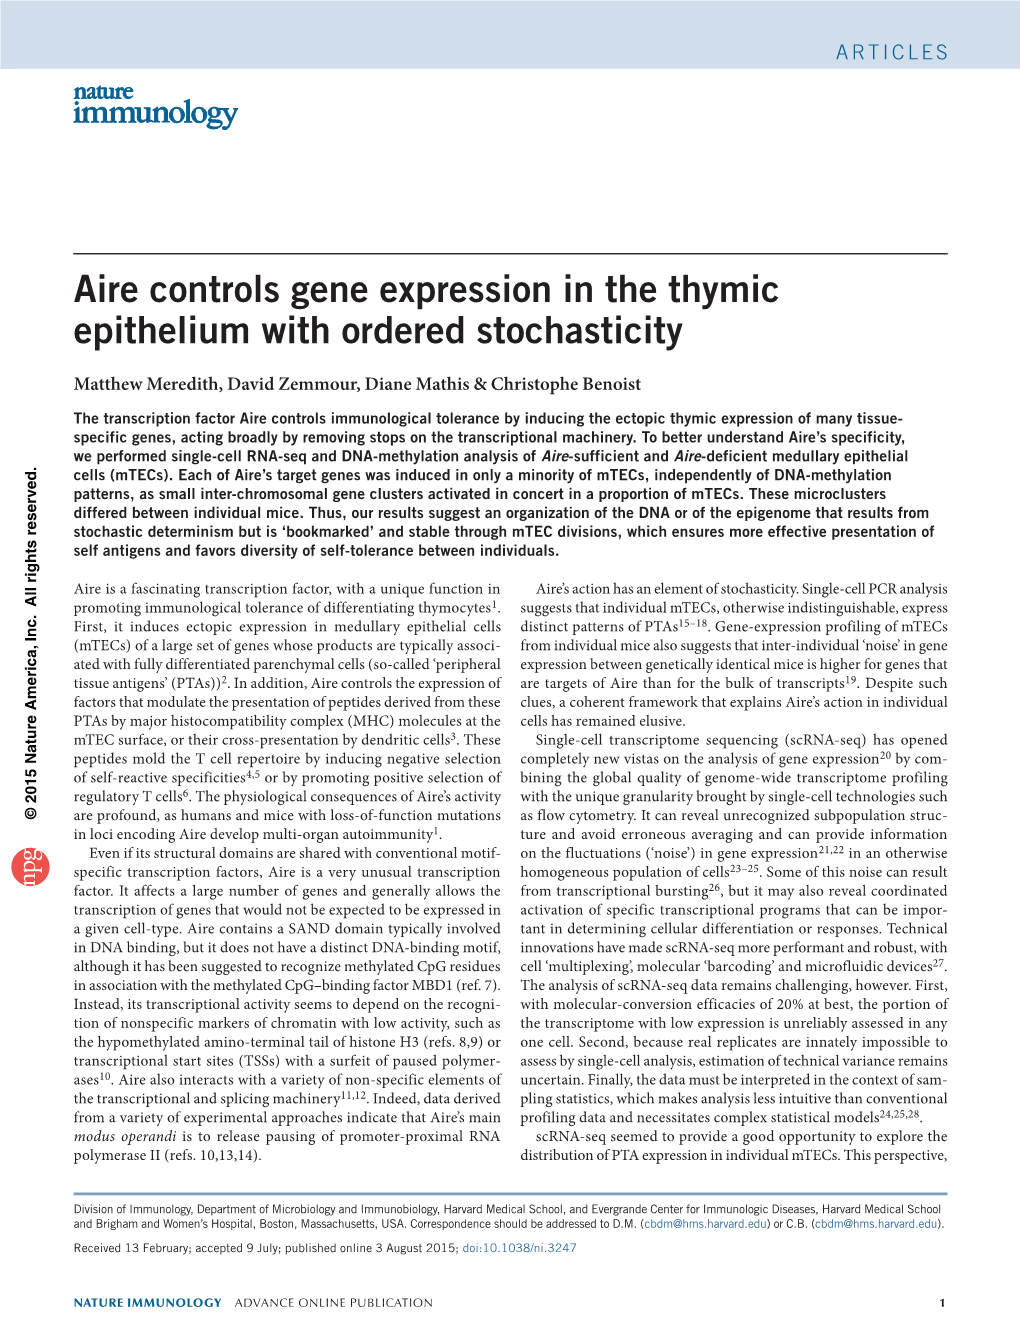 Aire Controls Gene Expression in the Thymic Epithelium with Ordered